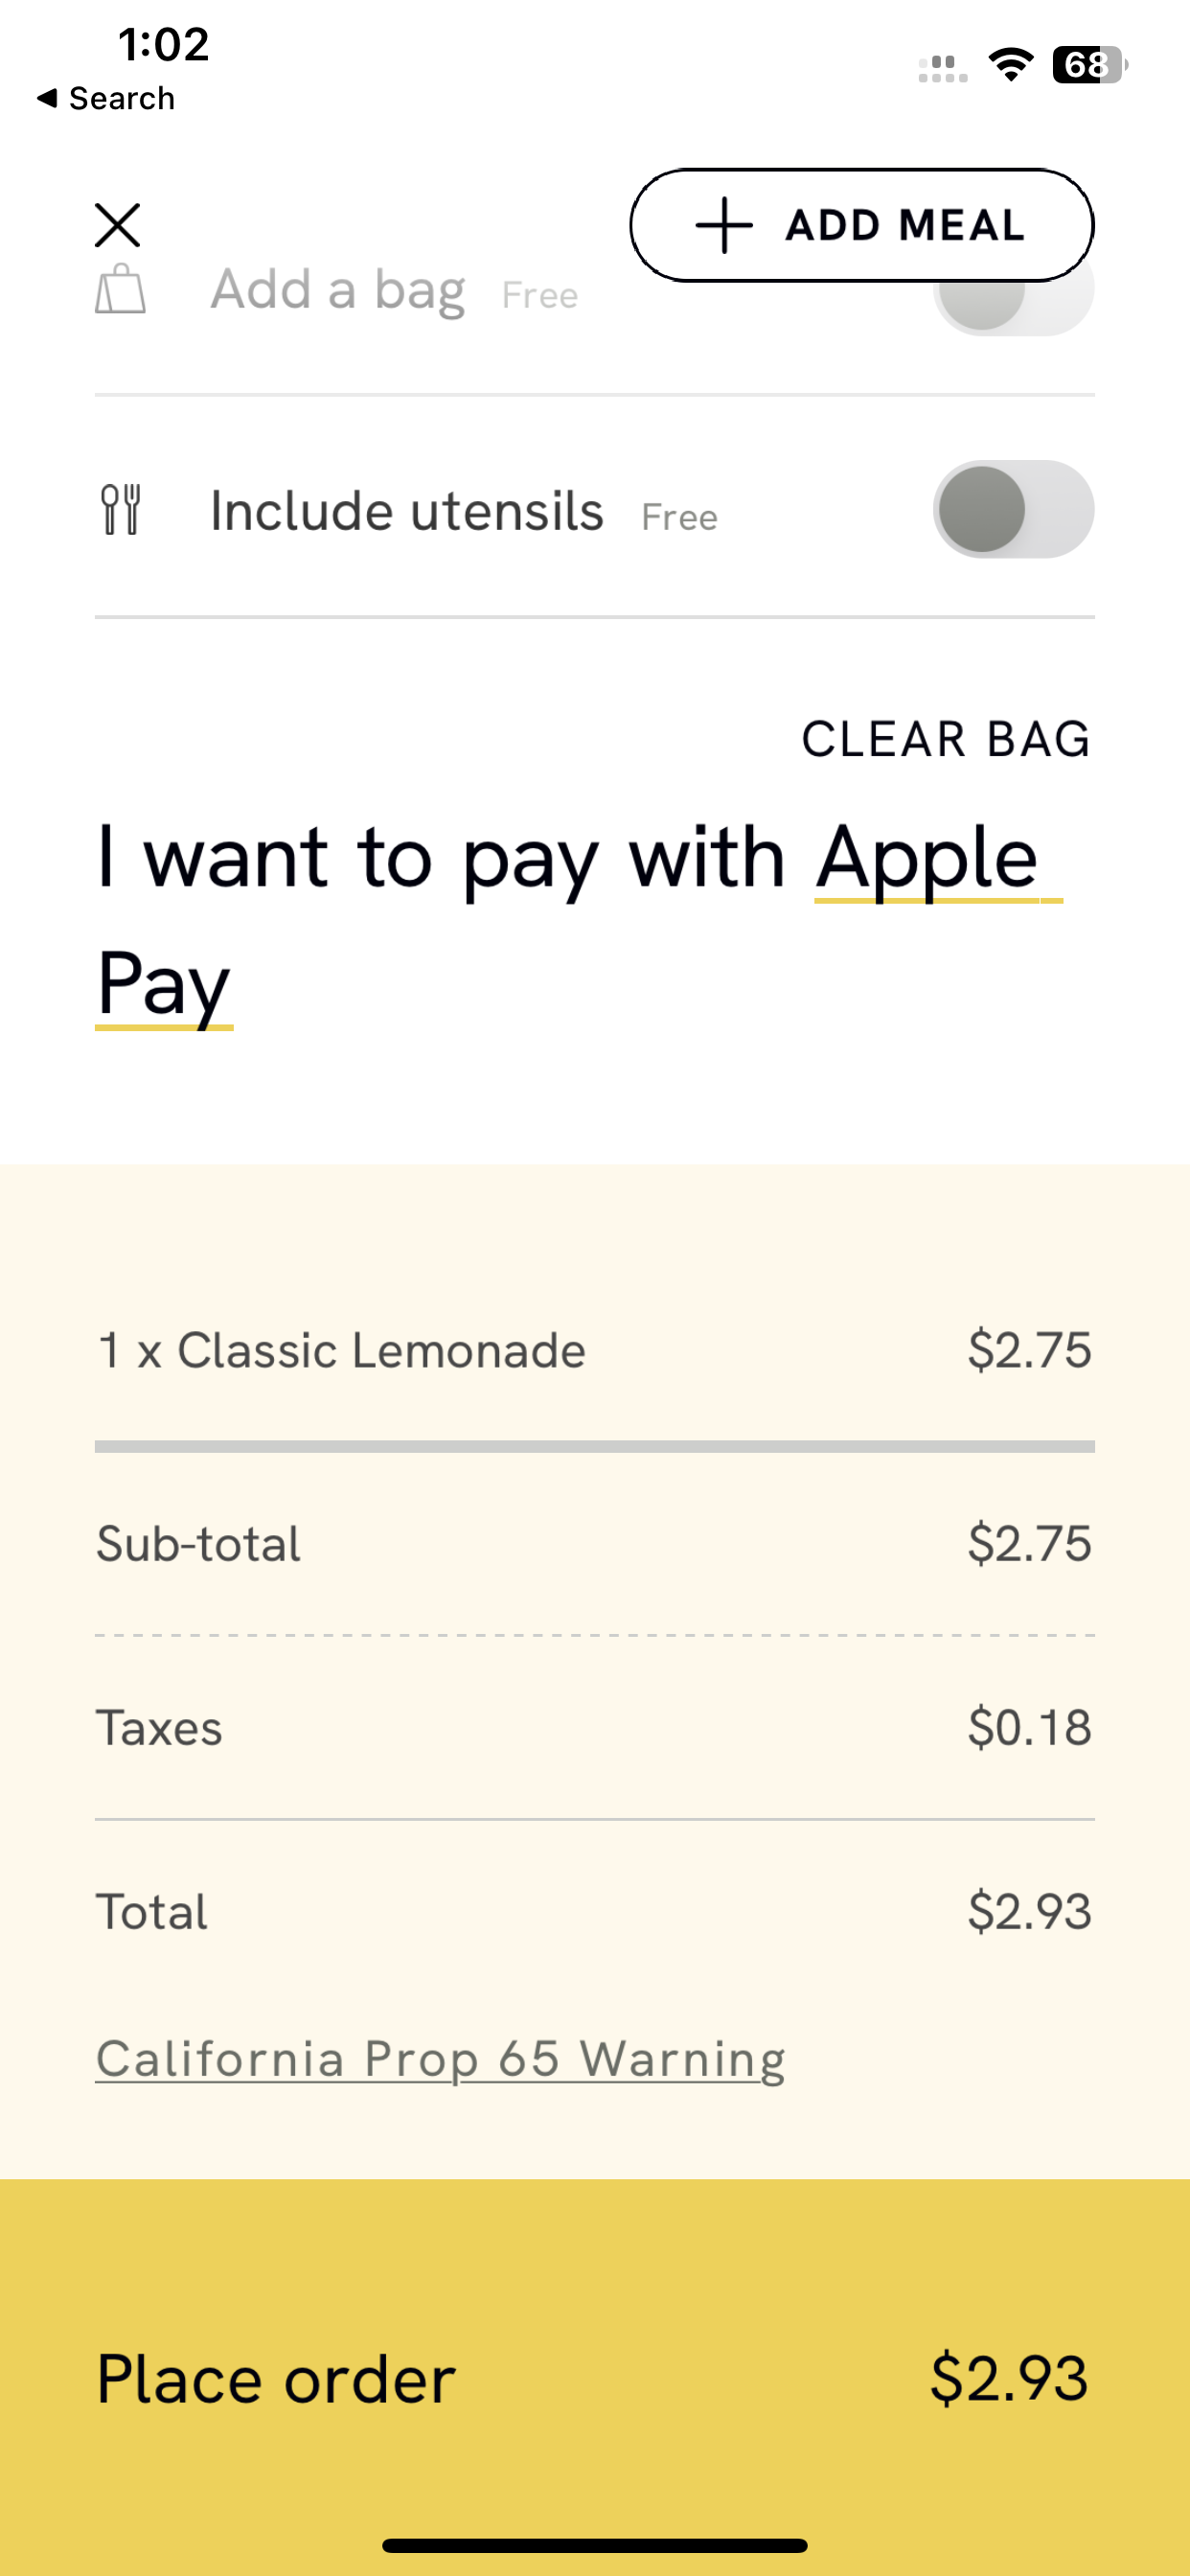 CAVA accepts Apple Pay in its iOS app.